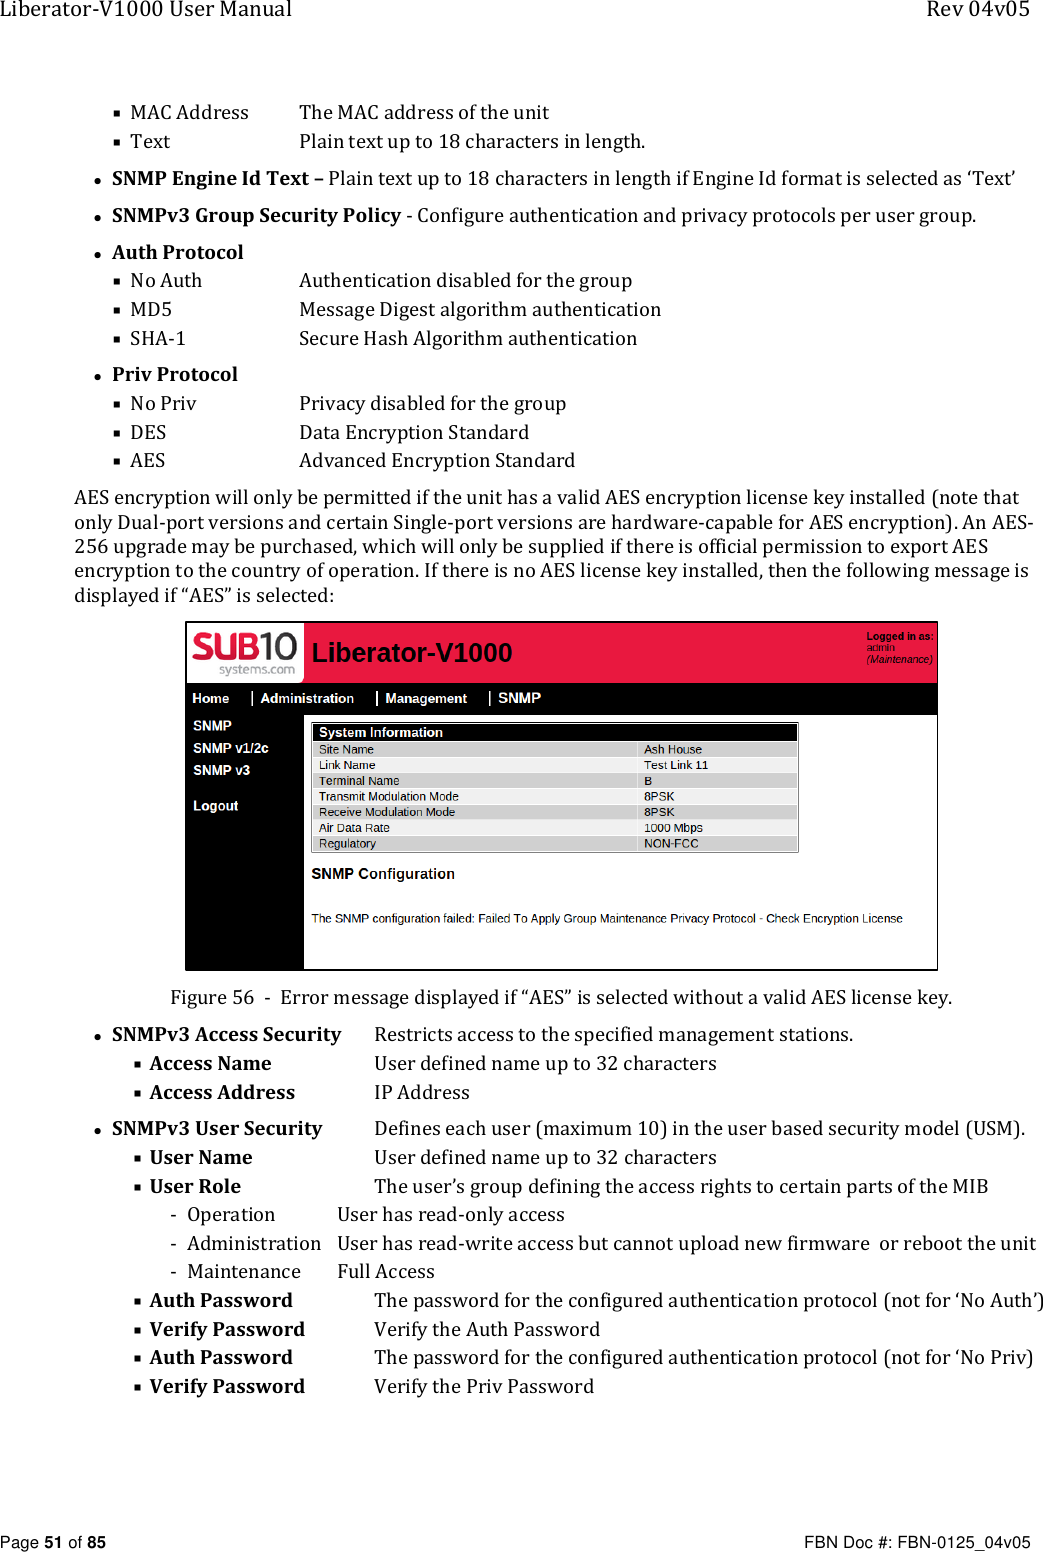 Liberator-V1000 User Manual  Rev 04v05     Page 51 of 85   FBN Doc #: FBN-0125_04v05  MAC Address  The MAC address of the unit  Text   Plain text up to 18 characters in length. • SNMP Engine Id Text – Plain text up to 18 characters in length if Engine Id format is selected as ‘Text’ • SNMPv3 Group Security Policy - Configure authentication and privacy protocols per user group. • Auth Protocol  No Auth   Authentication disabled for the group  MD5   Message Digest algorithm authentication  SHA-1  Secure Hash Algorithm authentication • Priv Protocol  No Priv  Privacy disabled for the group  DES  Data Encryption Standard  AES  Advanced Encryption Standard AES encryption will only be permitted if the unit has a valid AES encryption license key installed (note that only Dual-port versions and certain Single-port versions are hardware-capable for AES encryption). An AES-256 upgrade may be purchased, which will only be supplied if there is official permission to export AES encryption to the country of operation. If there is no AES license key installed, then the following message is displayed if “AES” is selected:  Figure 56  -  Error message displayed if “AES” is selected without a valid AES license key. • SNMPv3 Access Security   Restricts access to the specified management stations.  Access Name     User defined name up to 32 characters  Access Address   IP Address • SNMPv3 User Security  Defines each user (maximum 10) in the user based security model (USM).  User Name     User defined name up to 32 characters  User Role    The user’s group defining the access rights to certain parts of the MIB - Operation  User has read-only access  - Administration  User has read-write access but cannot upload new firmware  or reboot the unit - Maintenance  Full Access  Auth Password   The password for the configured authentication protocol (not for ‘No Auth’)  Verify Password  Verify the Auth Password   Auth Password   The password for the configured authentication protocol (not for ‘No Priv)  Verify Password  Verify the Priv Password 